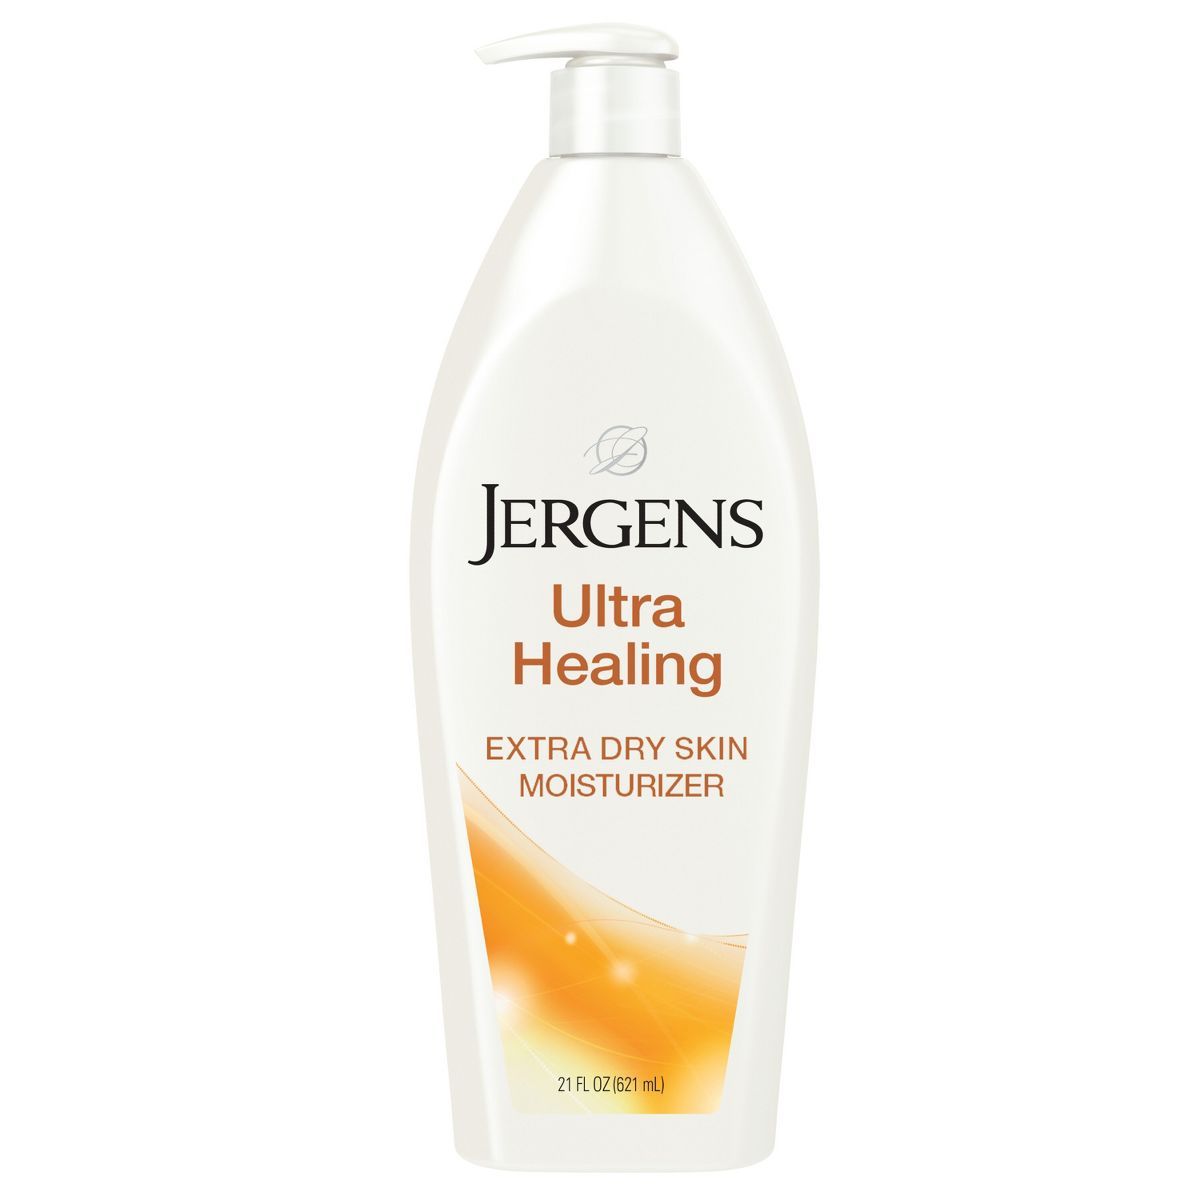 Jergens Ultra Healing Hand and Body Lotion, Dry Skin Moisturizer with Vitamins C, E, and B5 | Target